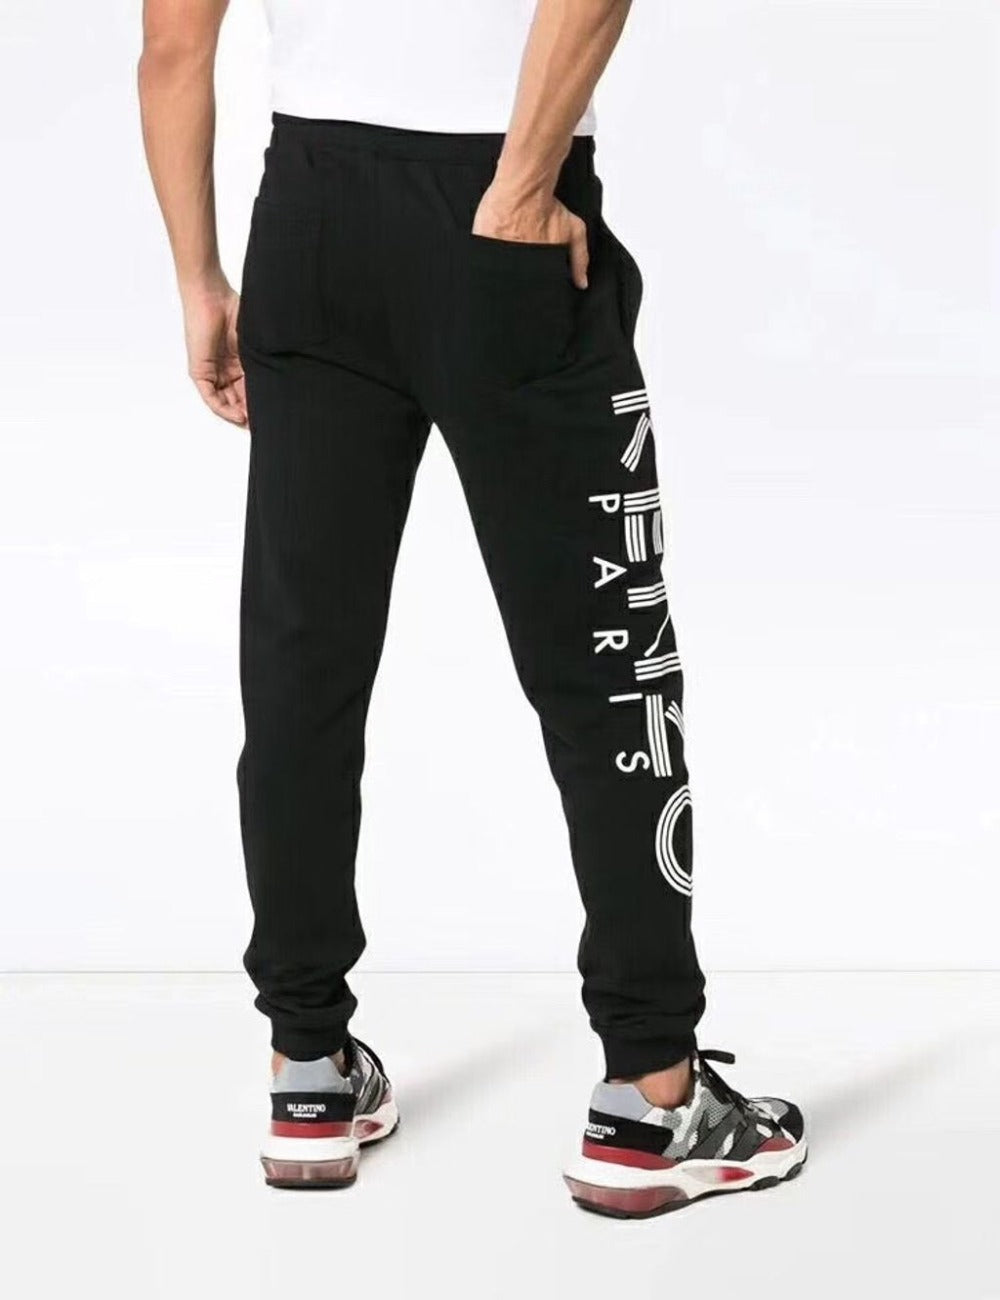 Kenzo White Wording Sweat Long Pant - Shop Streetwear, Sneakers, Slippers and Gifts online | Malaysia - The Factory KL